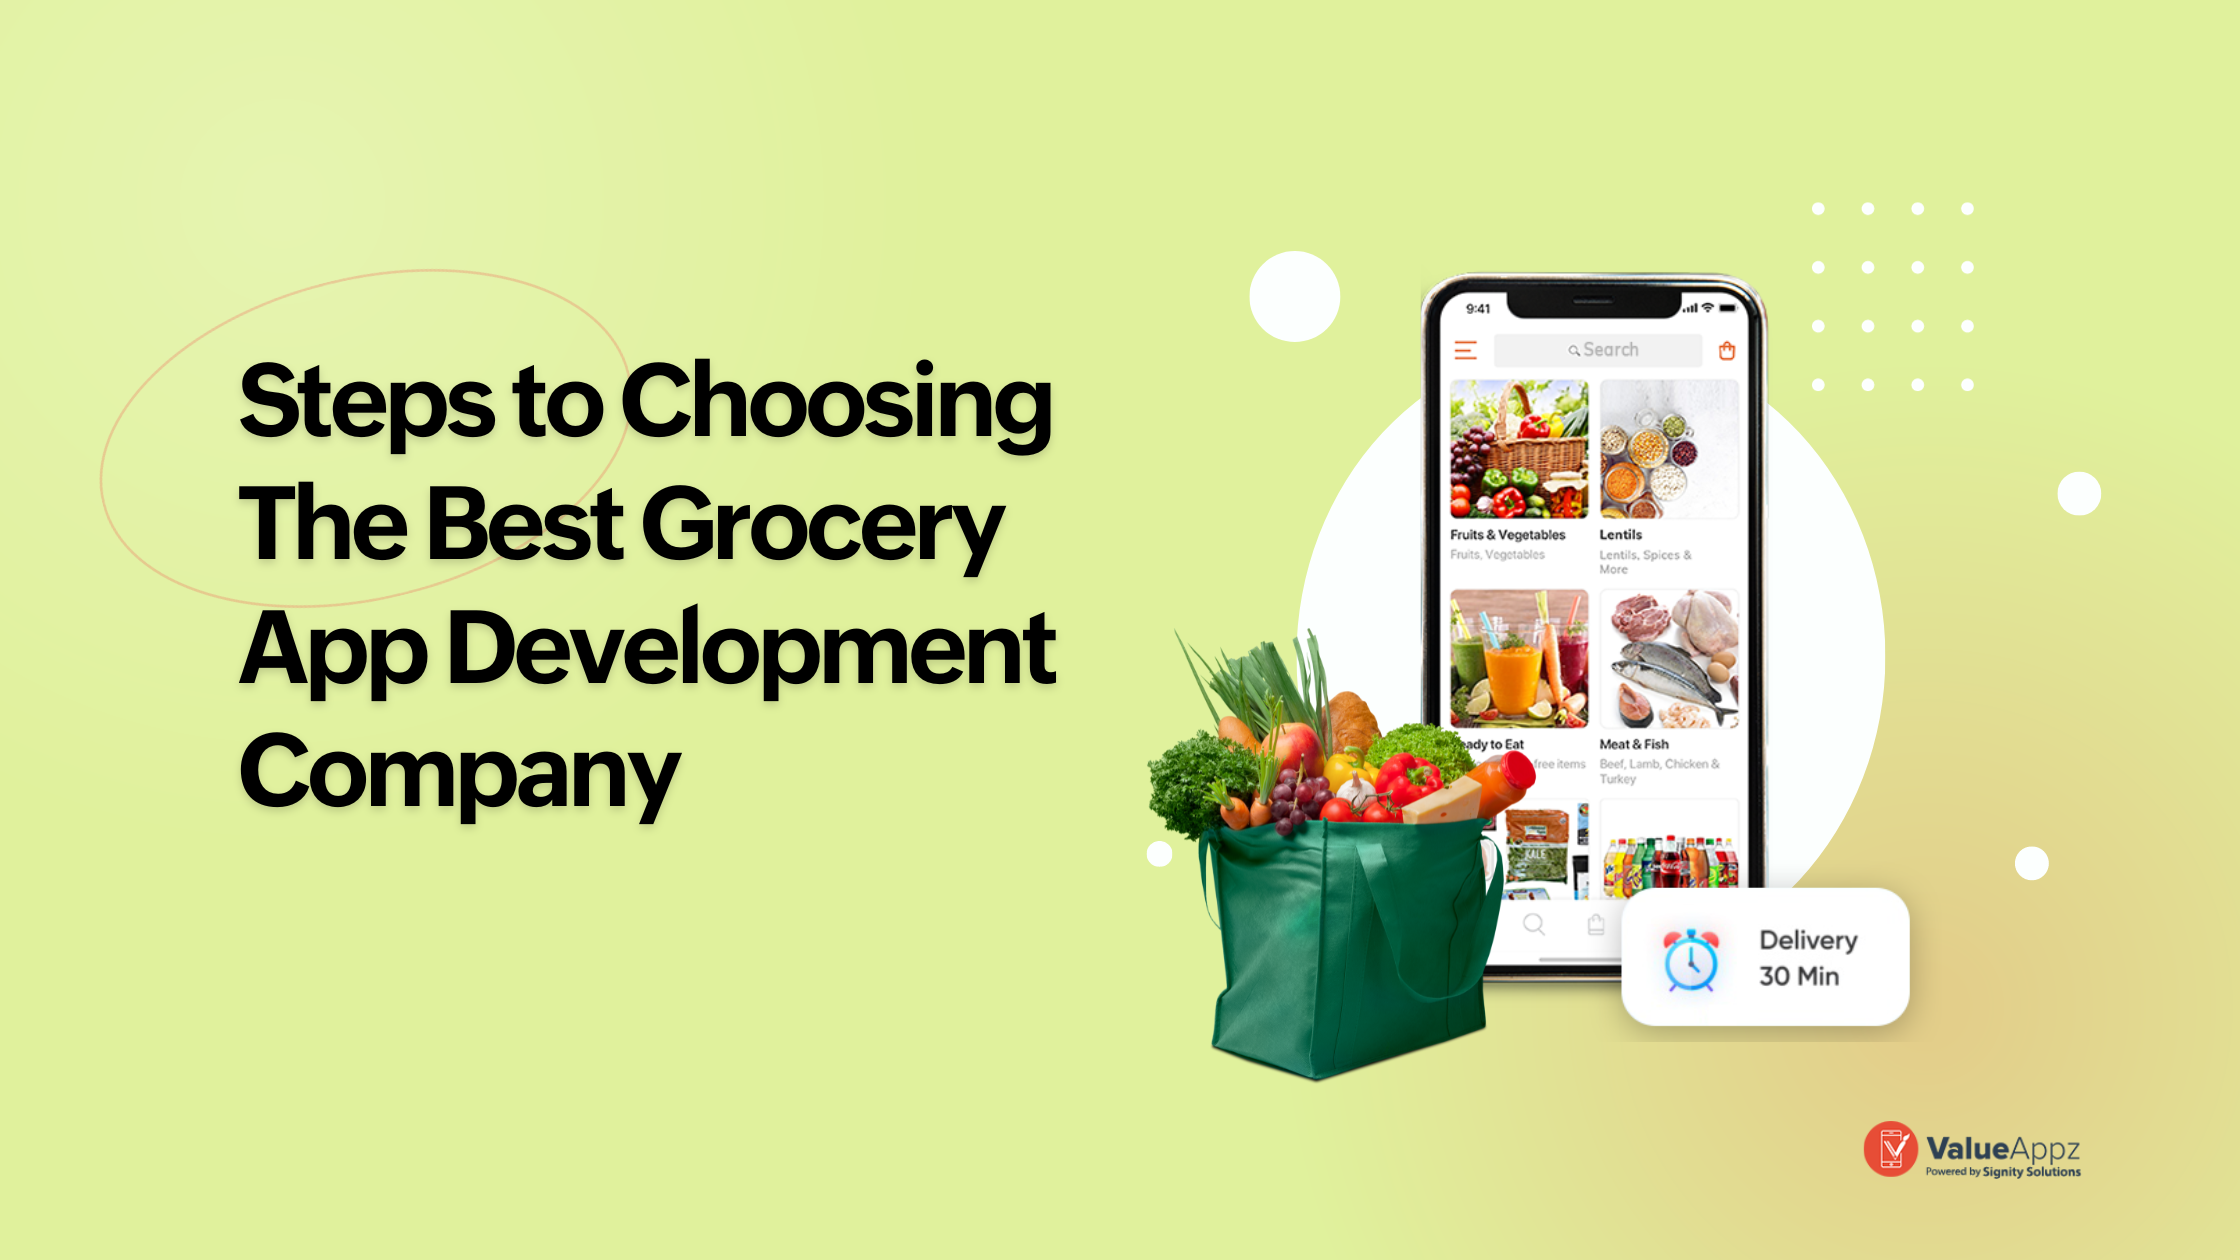 Steps to Follow while Selecting A Grocery App Development Company